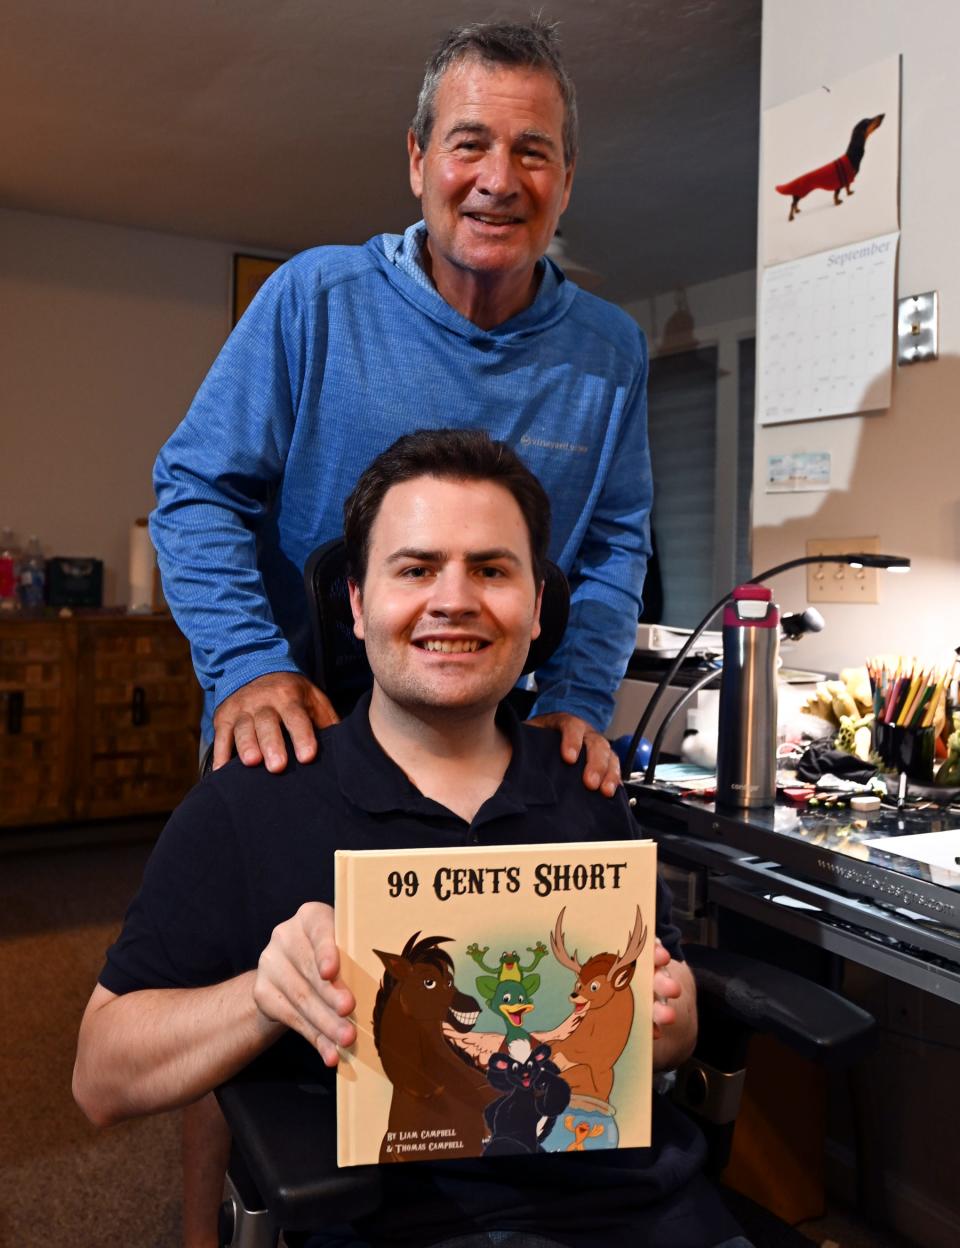 Liam Campbell, diagnosed on the autism spectrum, communicated by drawing until he started talking at 8. Liam's dad, Tom, standing, said he knew his son could draw when at age 3 he sketched a sign on a ferry. The two have now published a book illustrated by Liam.